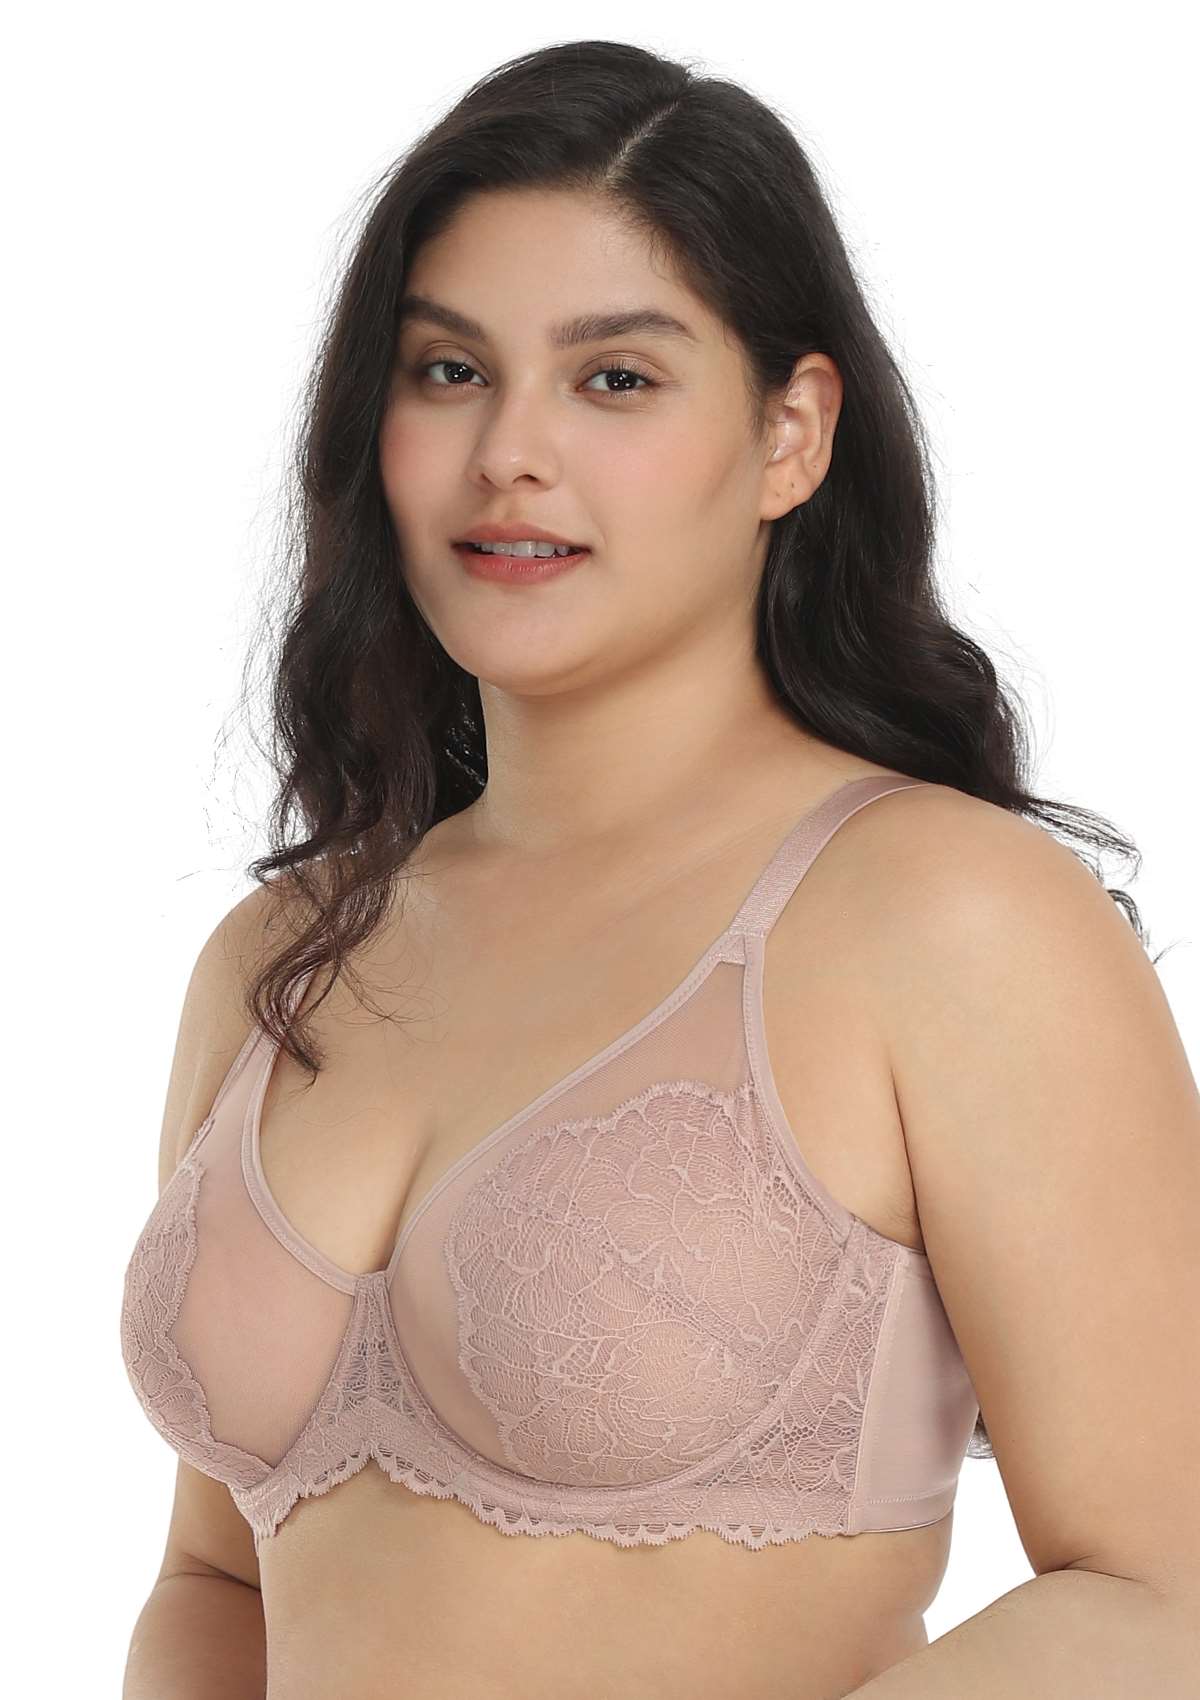 HSIA Blossom Lace Bra And Panties Set: Best Bra For Large Busts - Dark Pink / 42 / C